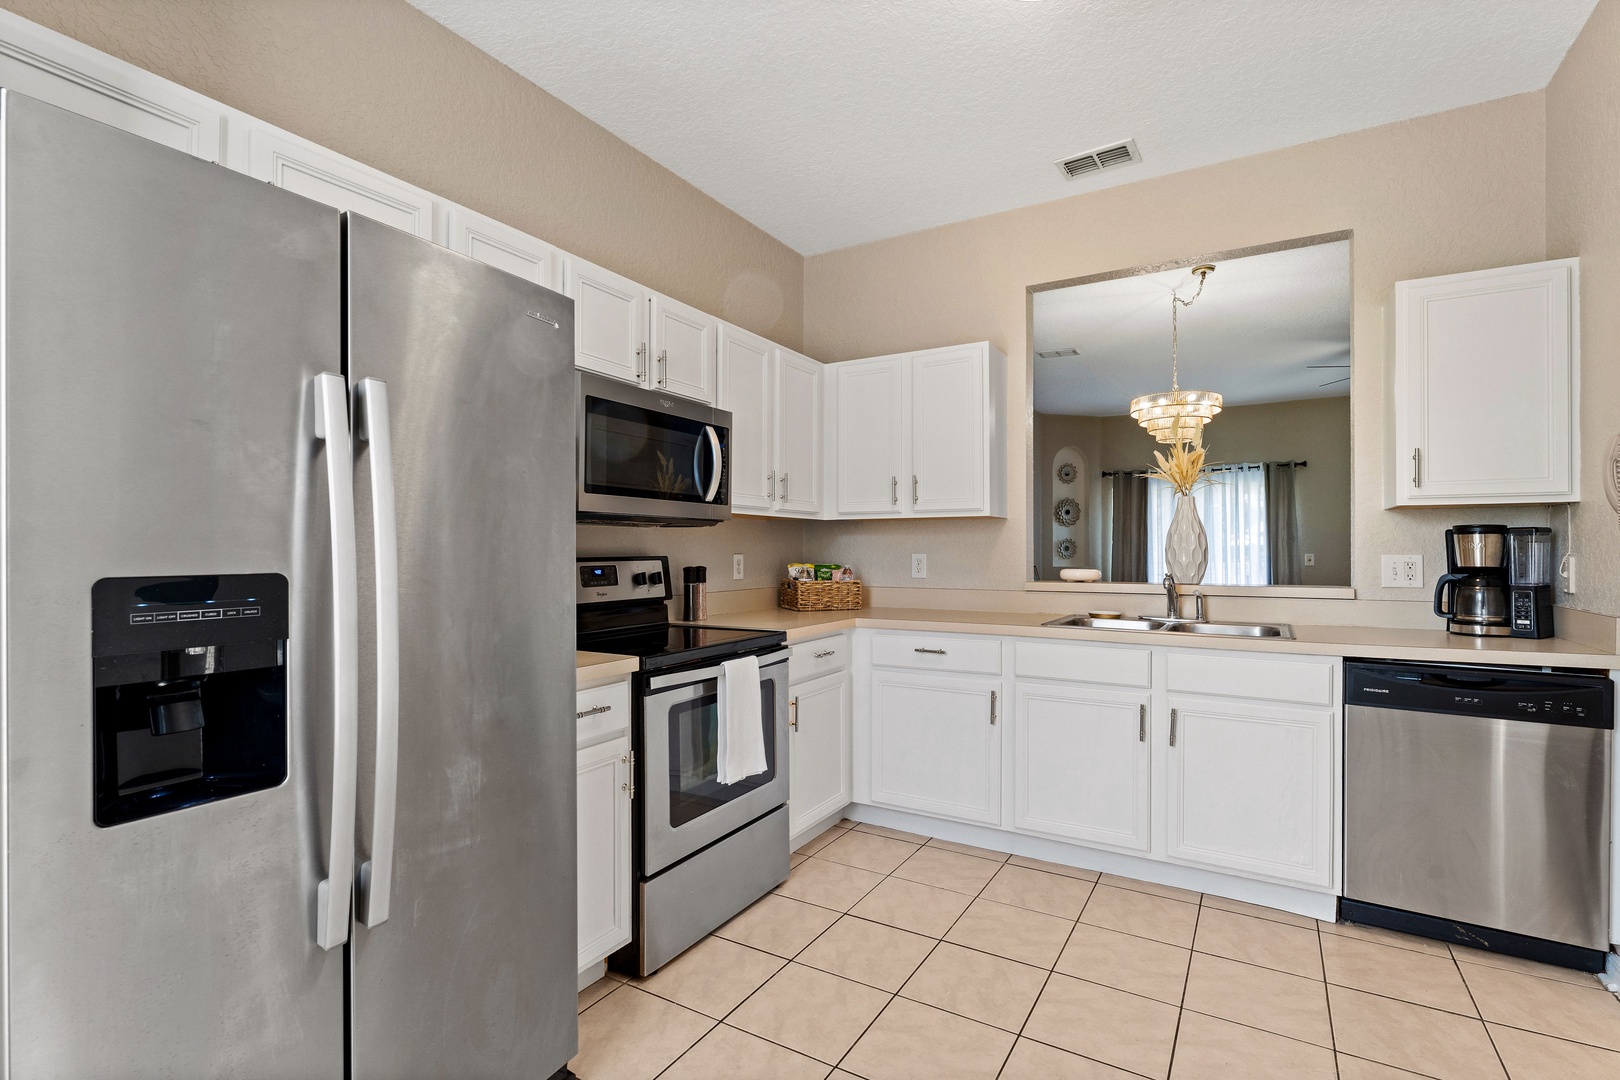 The bright, airy kitchen is well equipped with all the comforts of home